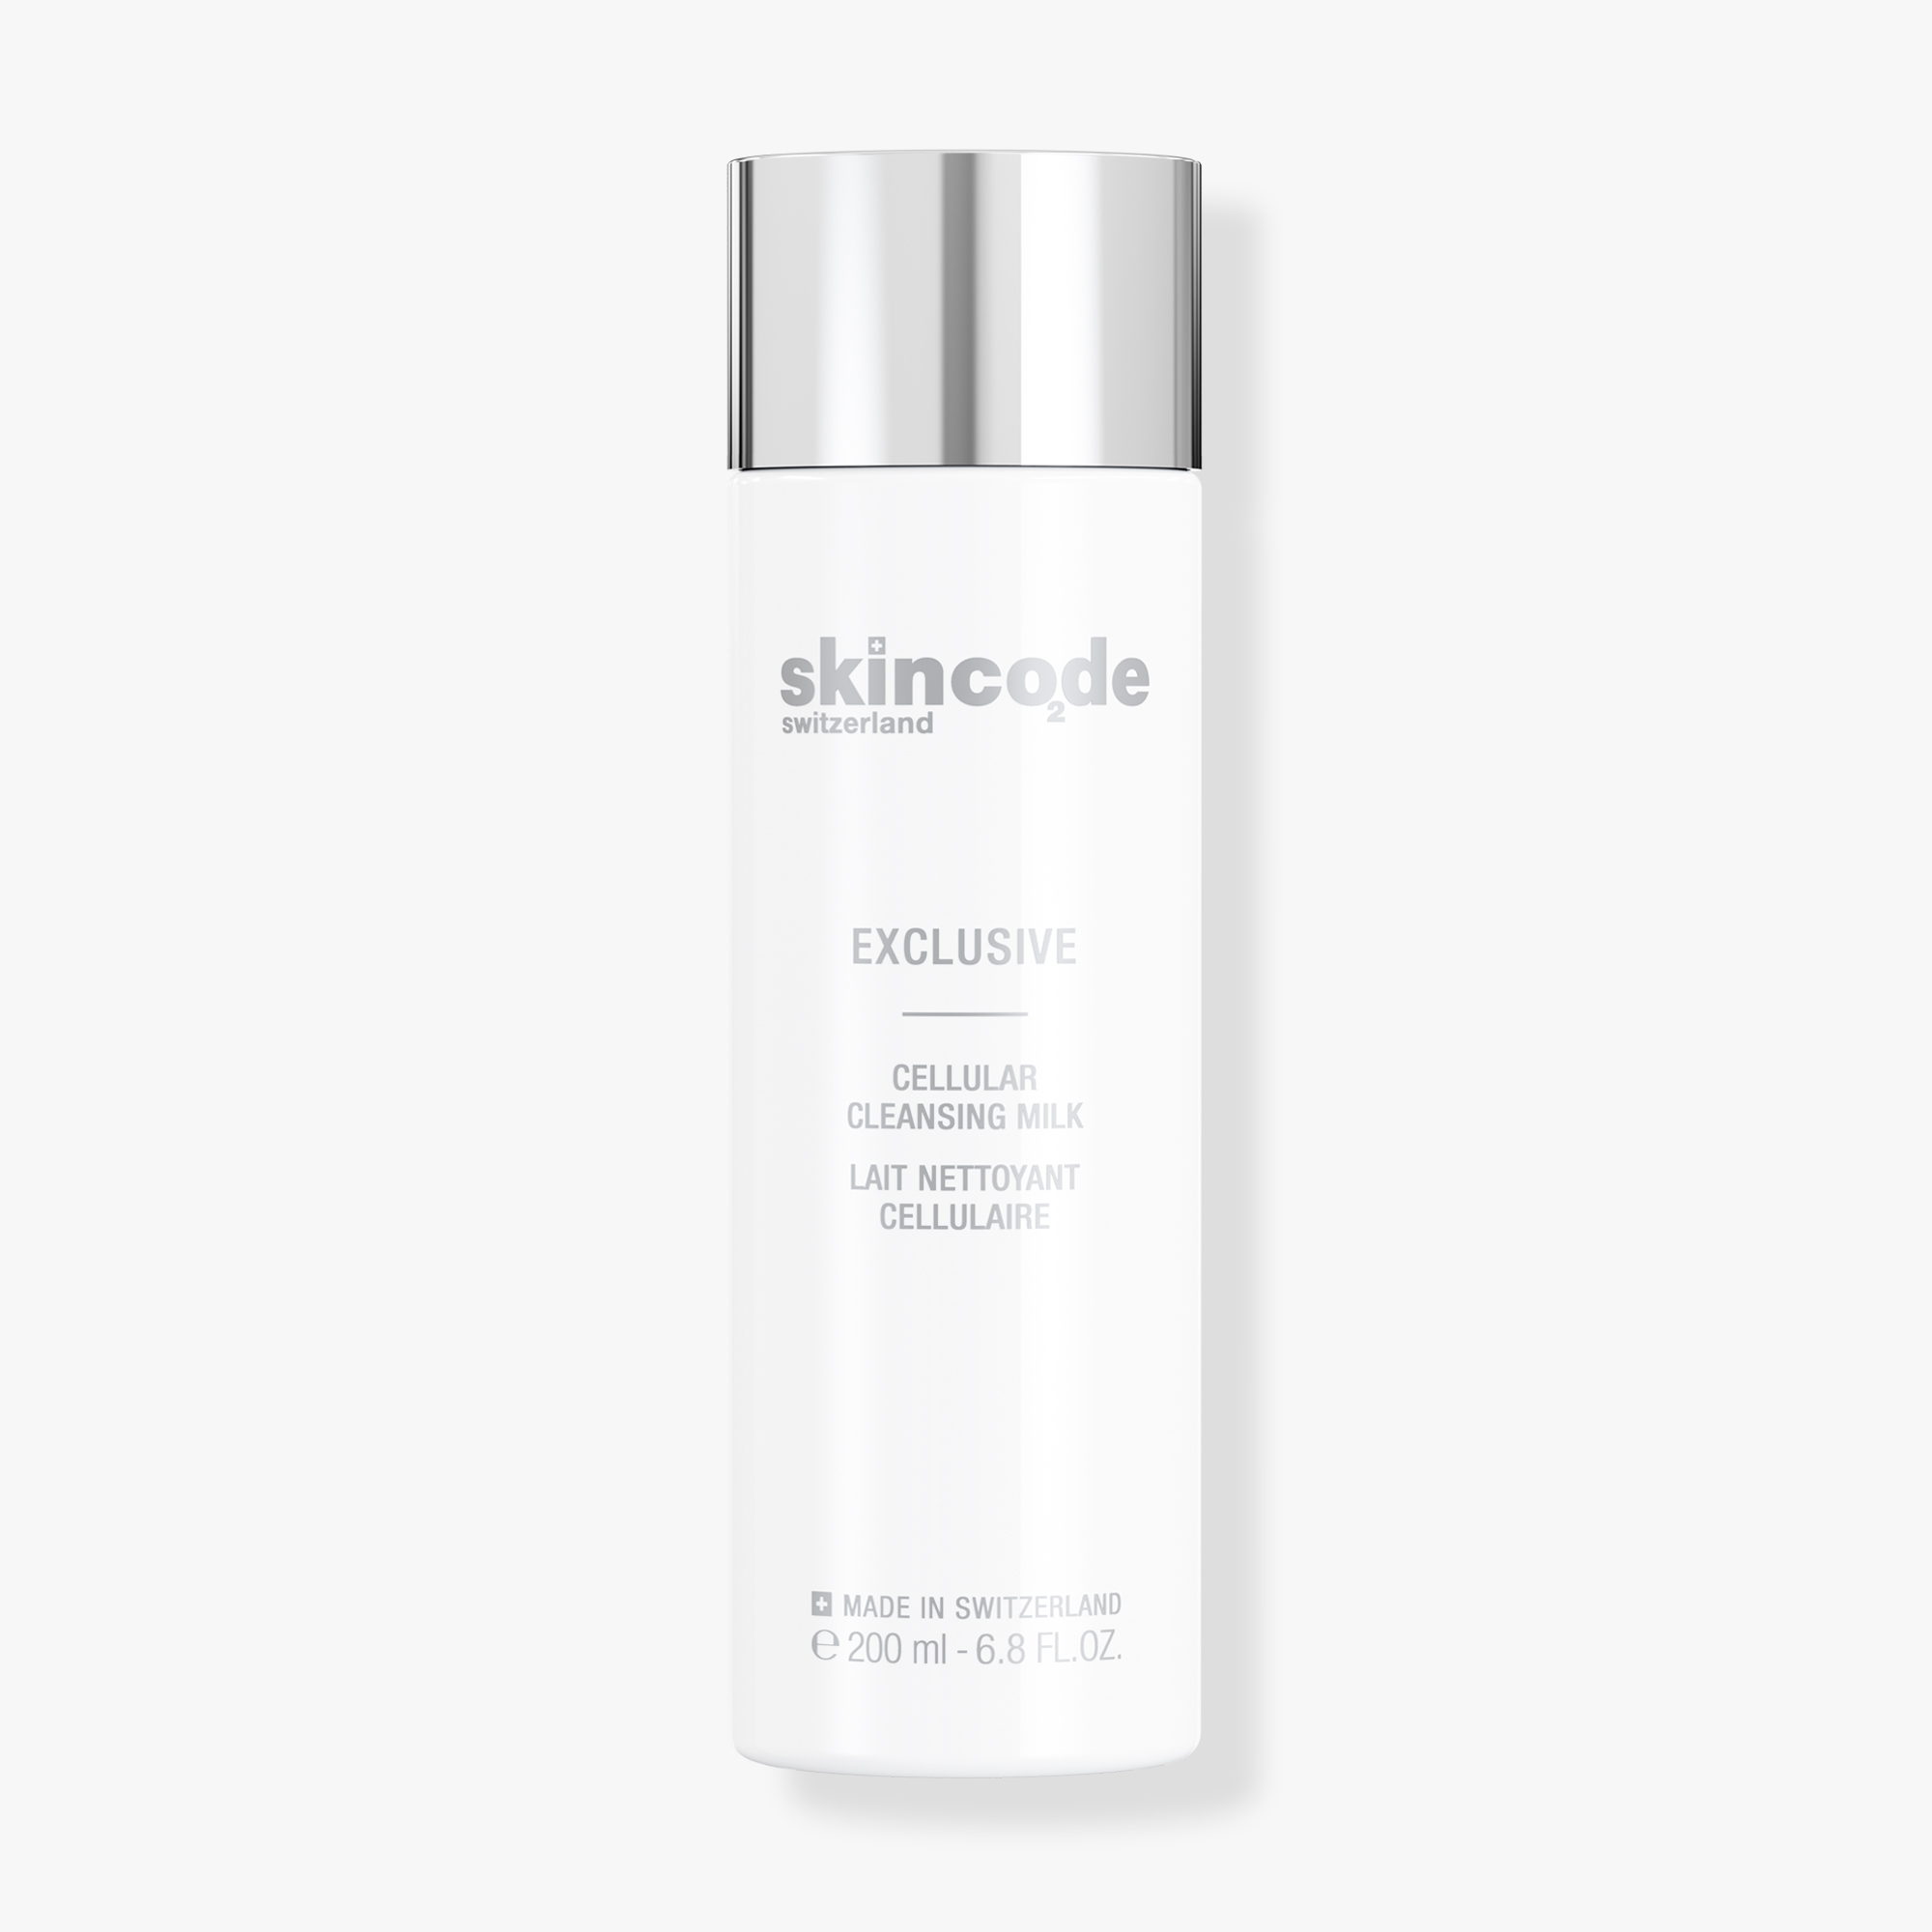 Skincode Exclusive Cellular Cleansing Milk, 200ml